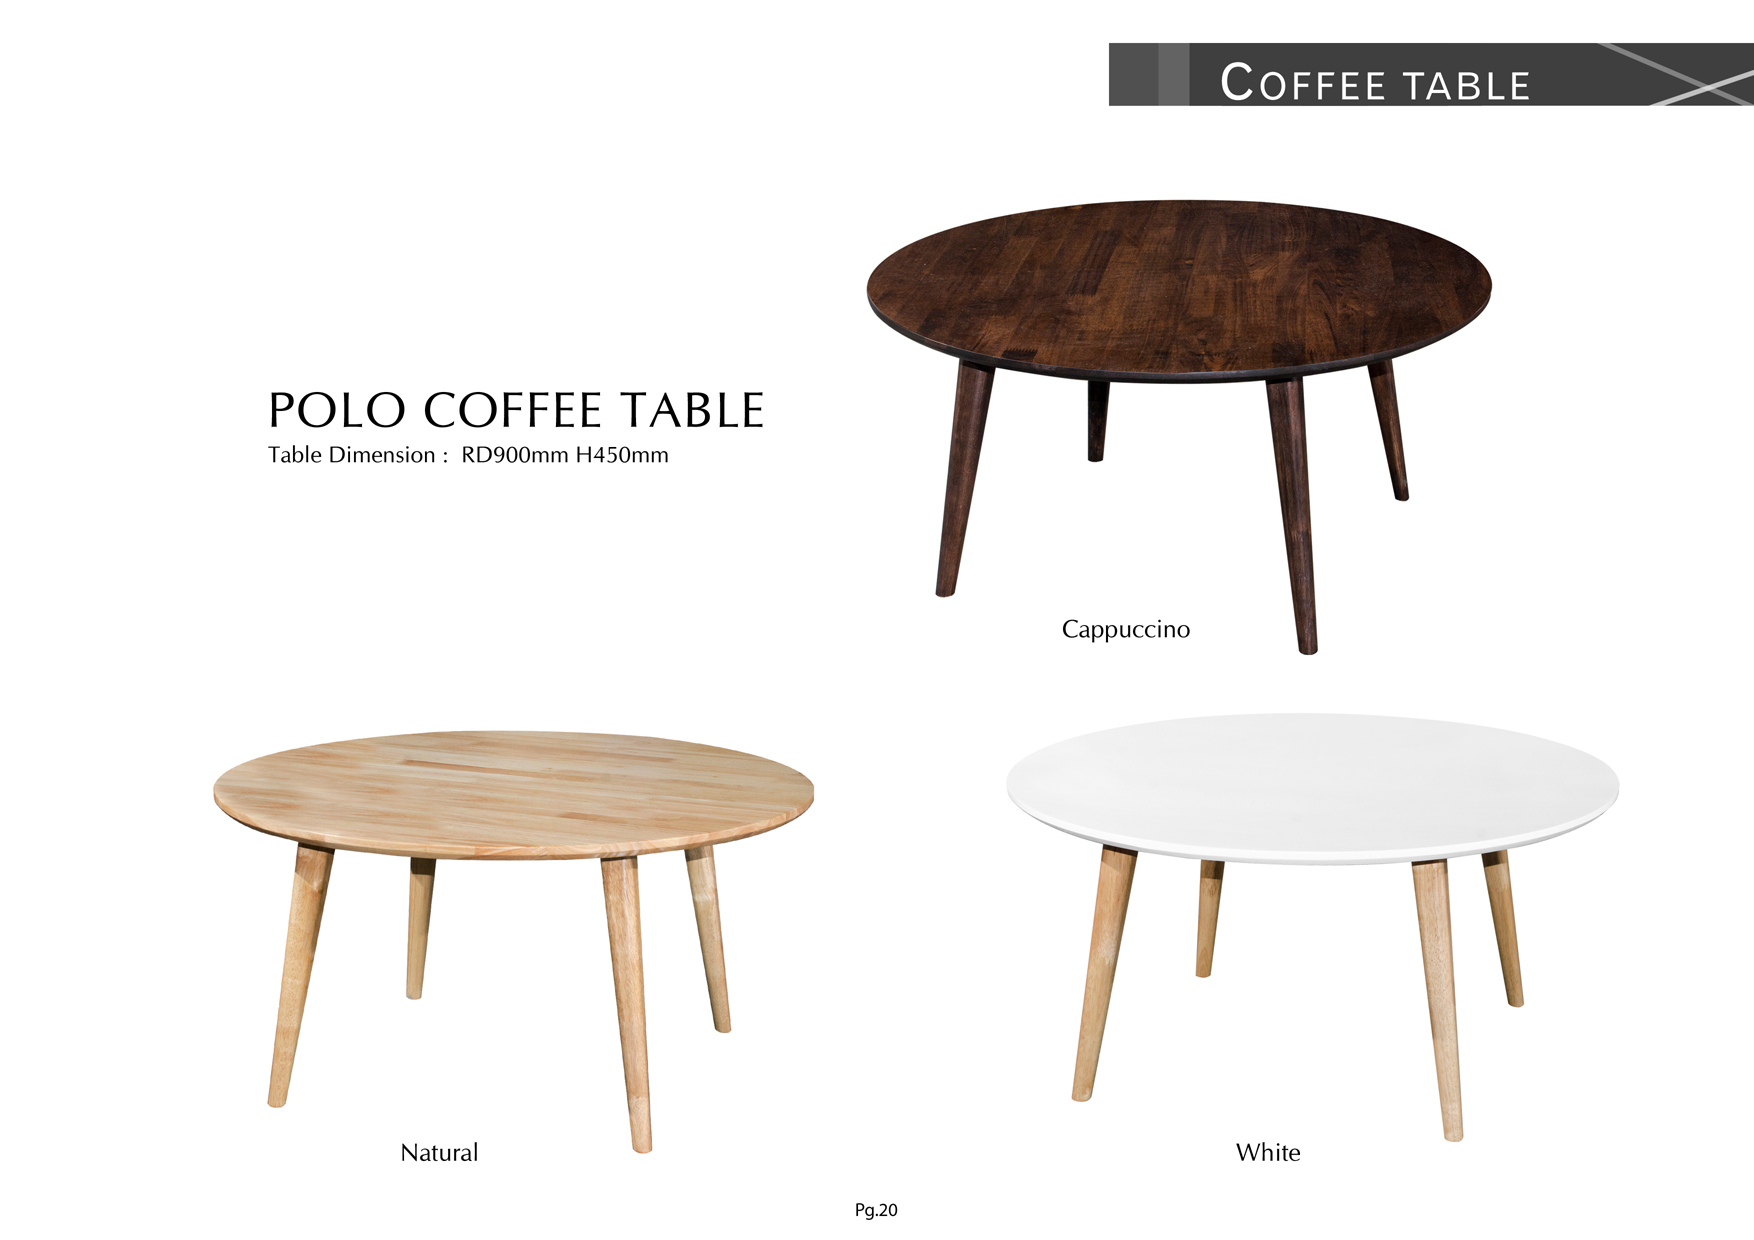 Product: PG20. POLO COFFEE TABLE